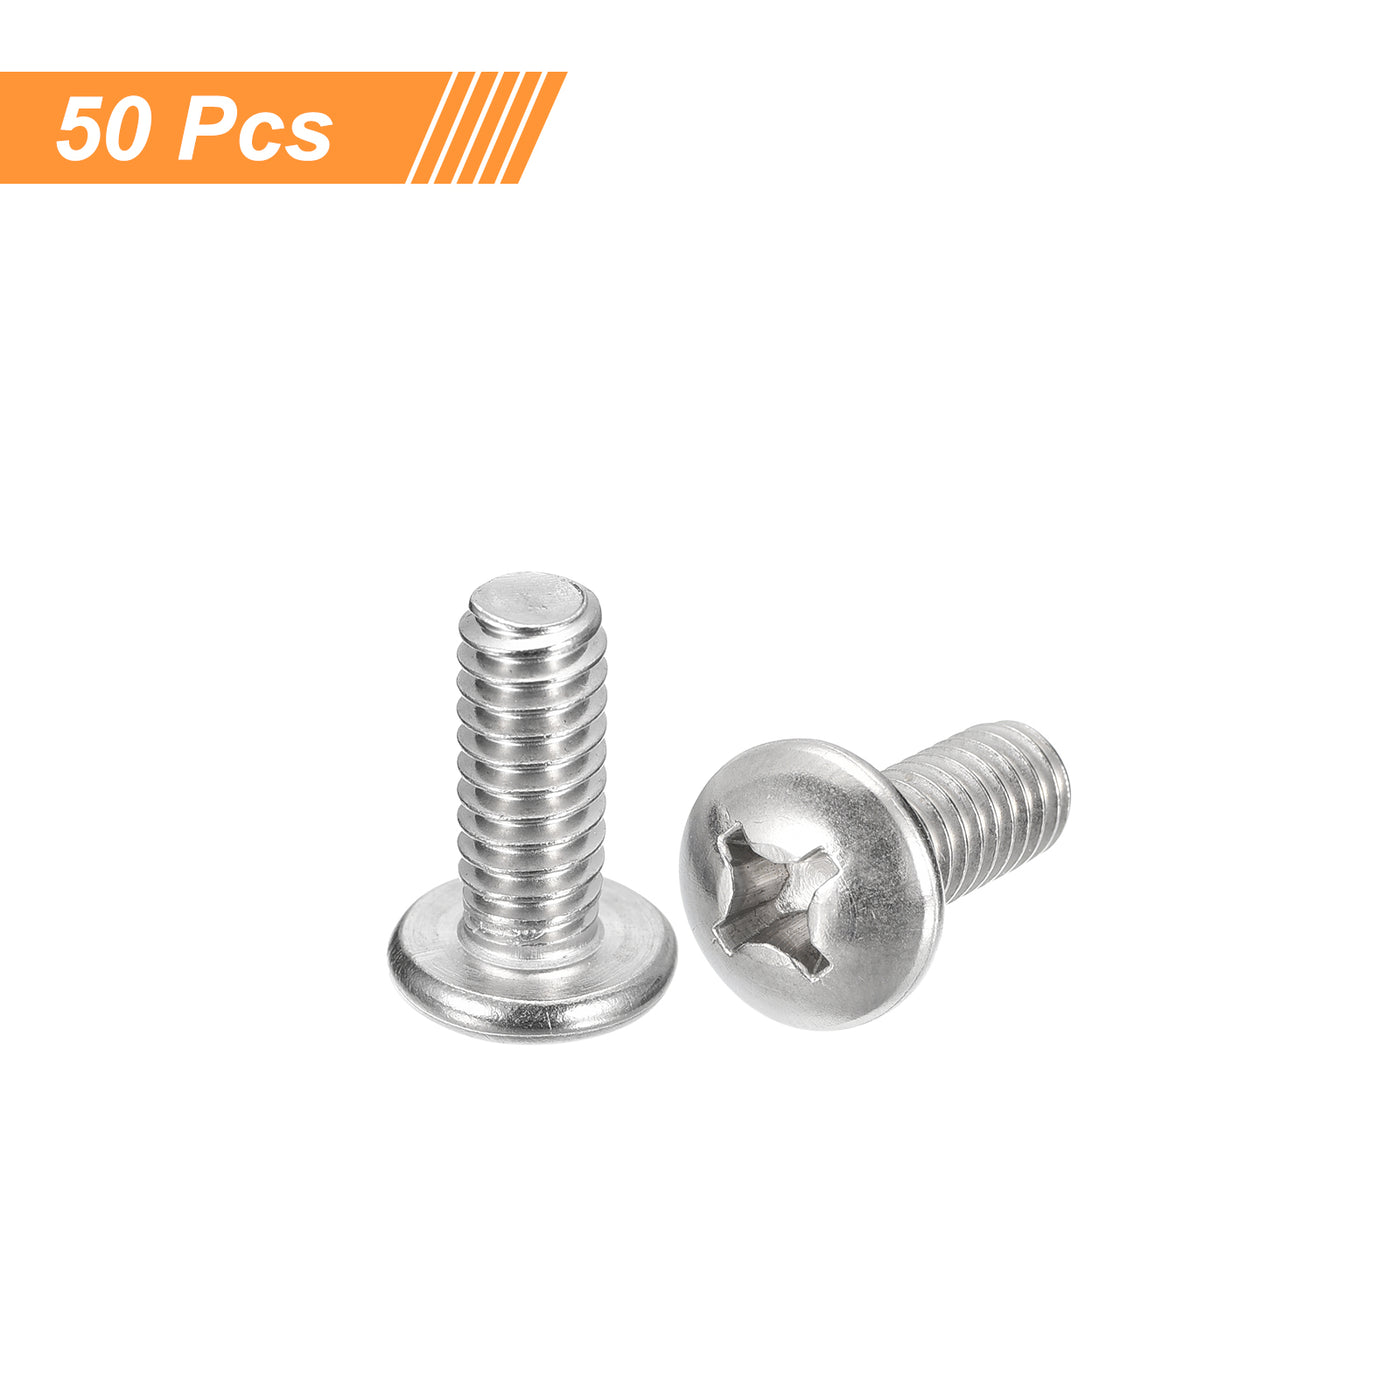 uxcell Uxcell 1/4-20x5/8" Pan Head Machine Screws, Stainless Steel 18-8 Screw, Pack of 50